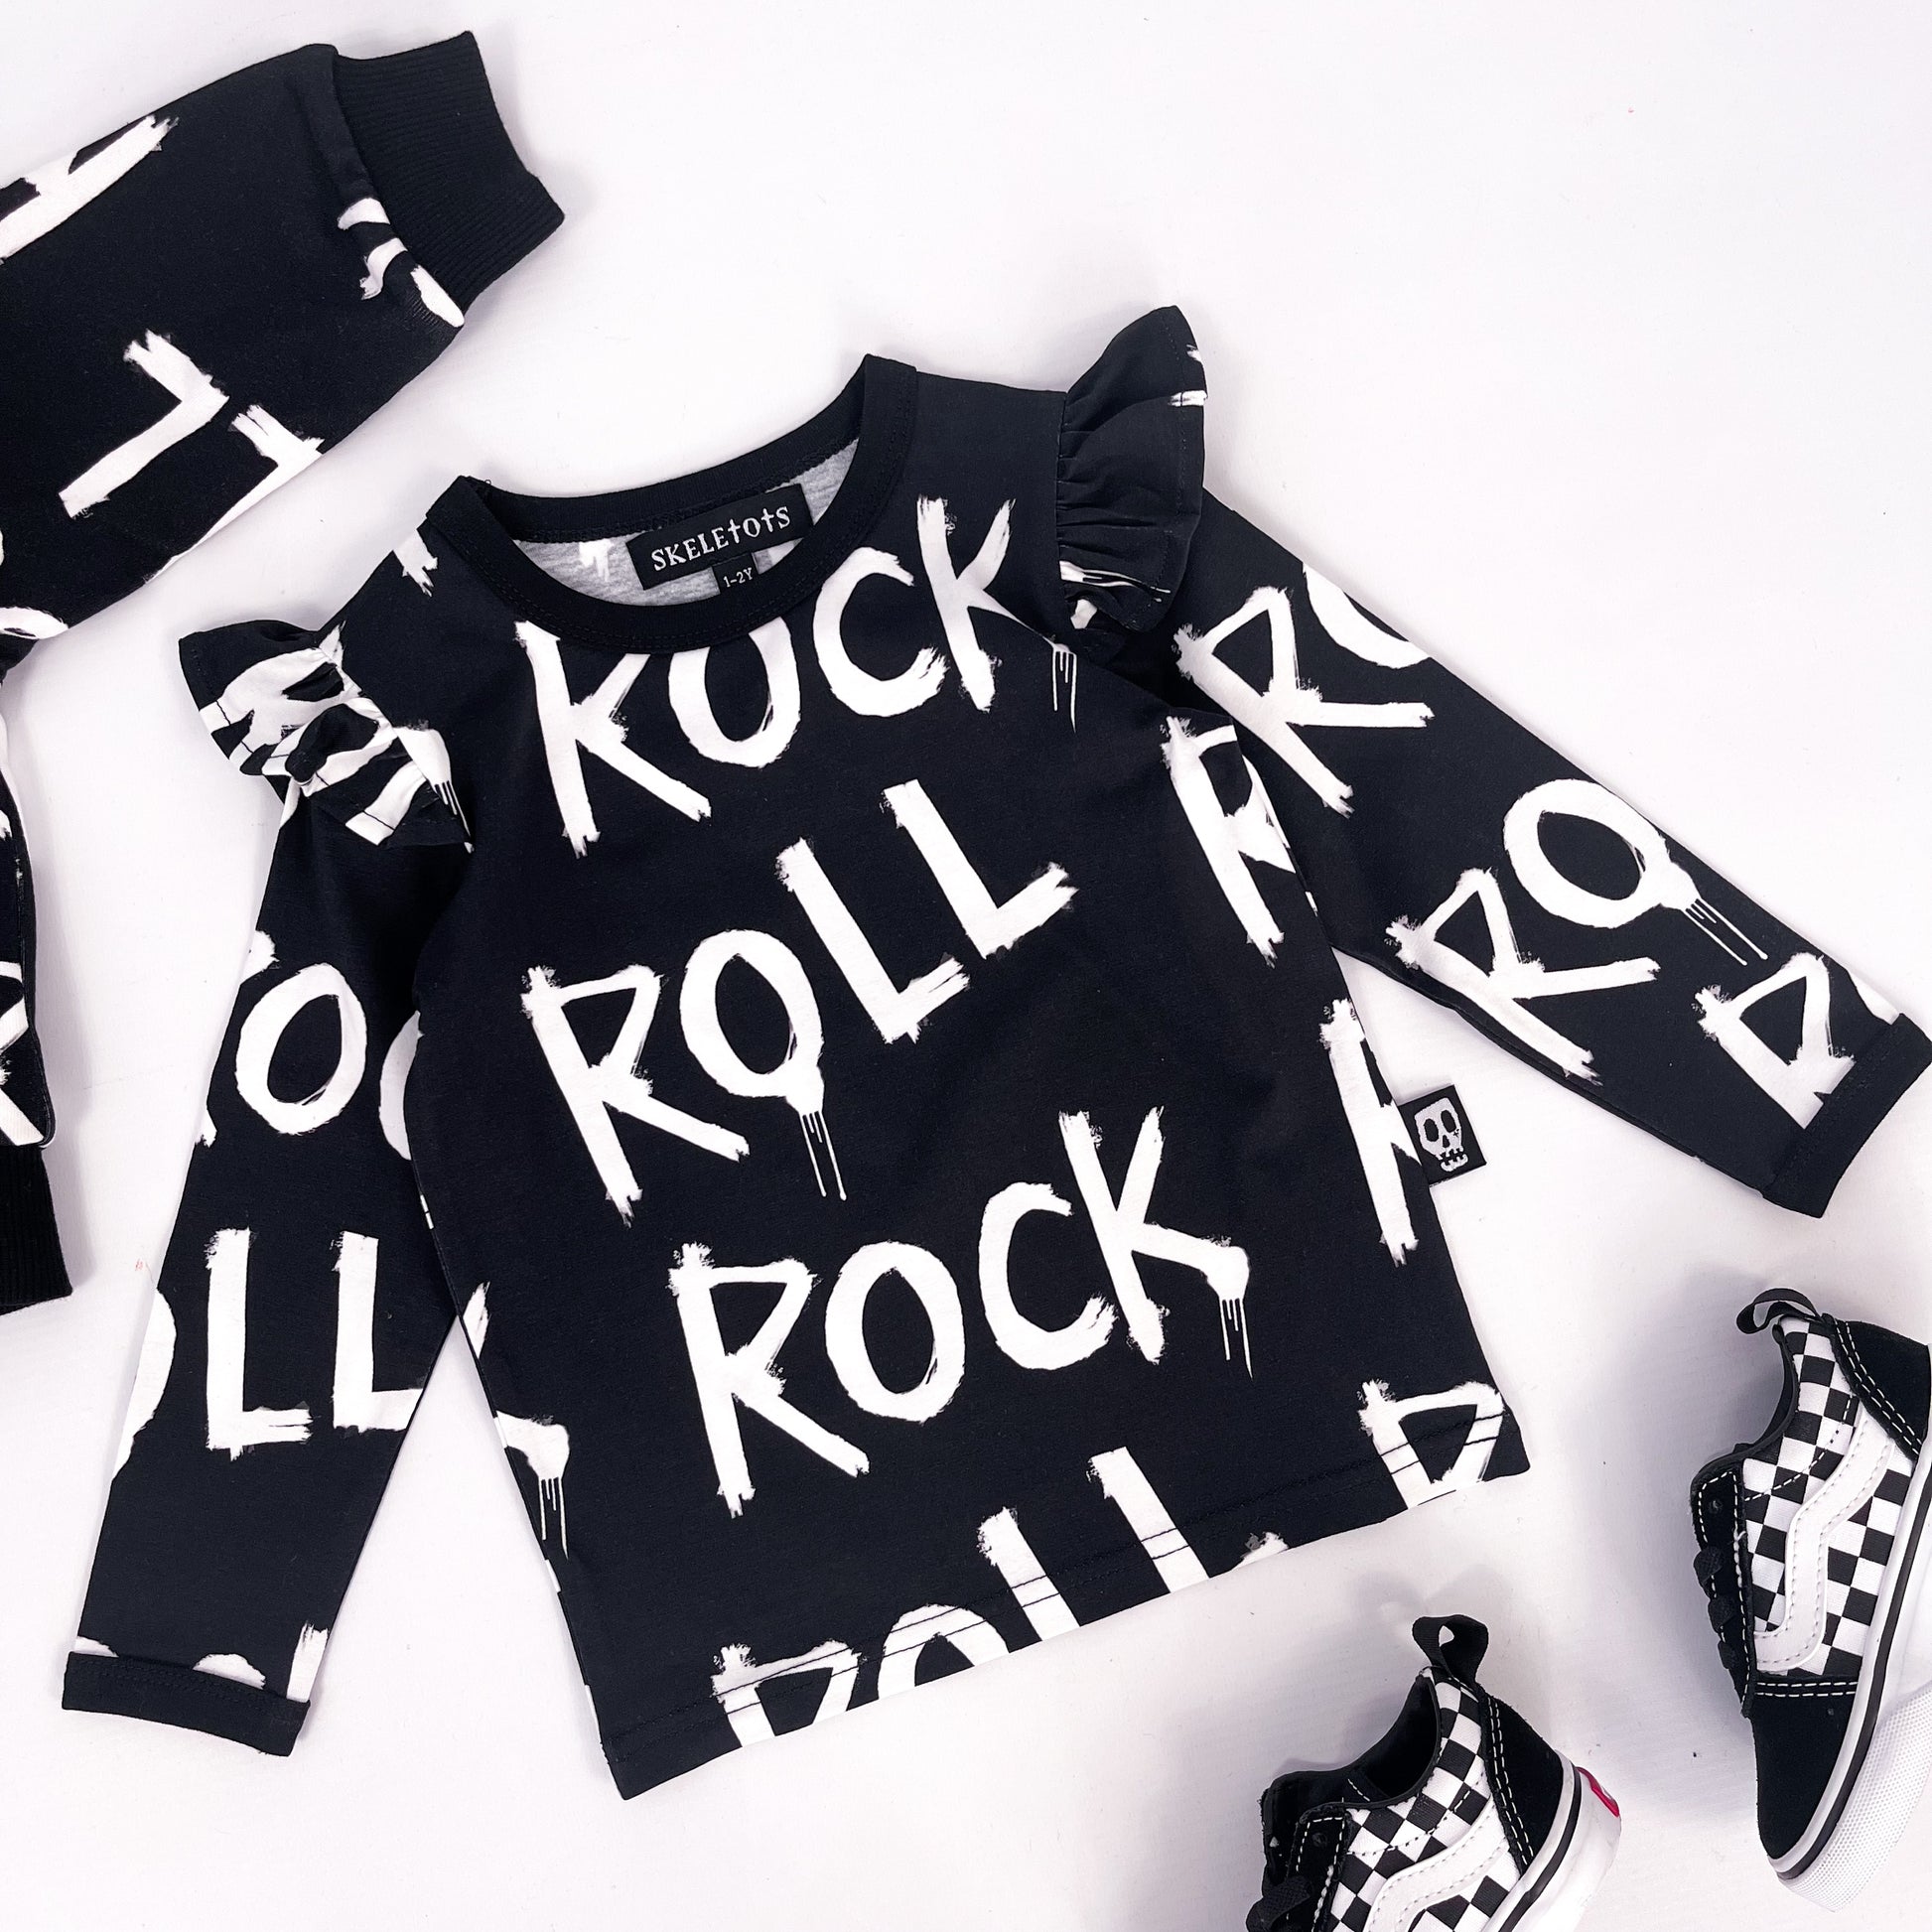 Kids black long sleeved sweatshirt with frilled shoulder detail and words "rock" and "roll" printed on it repeatedly